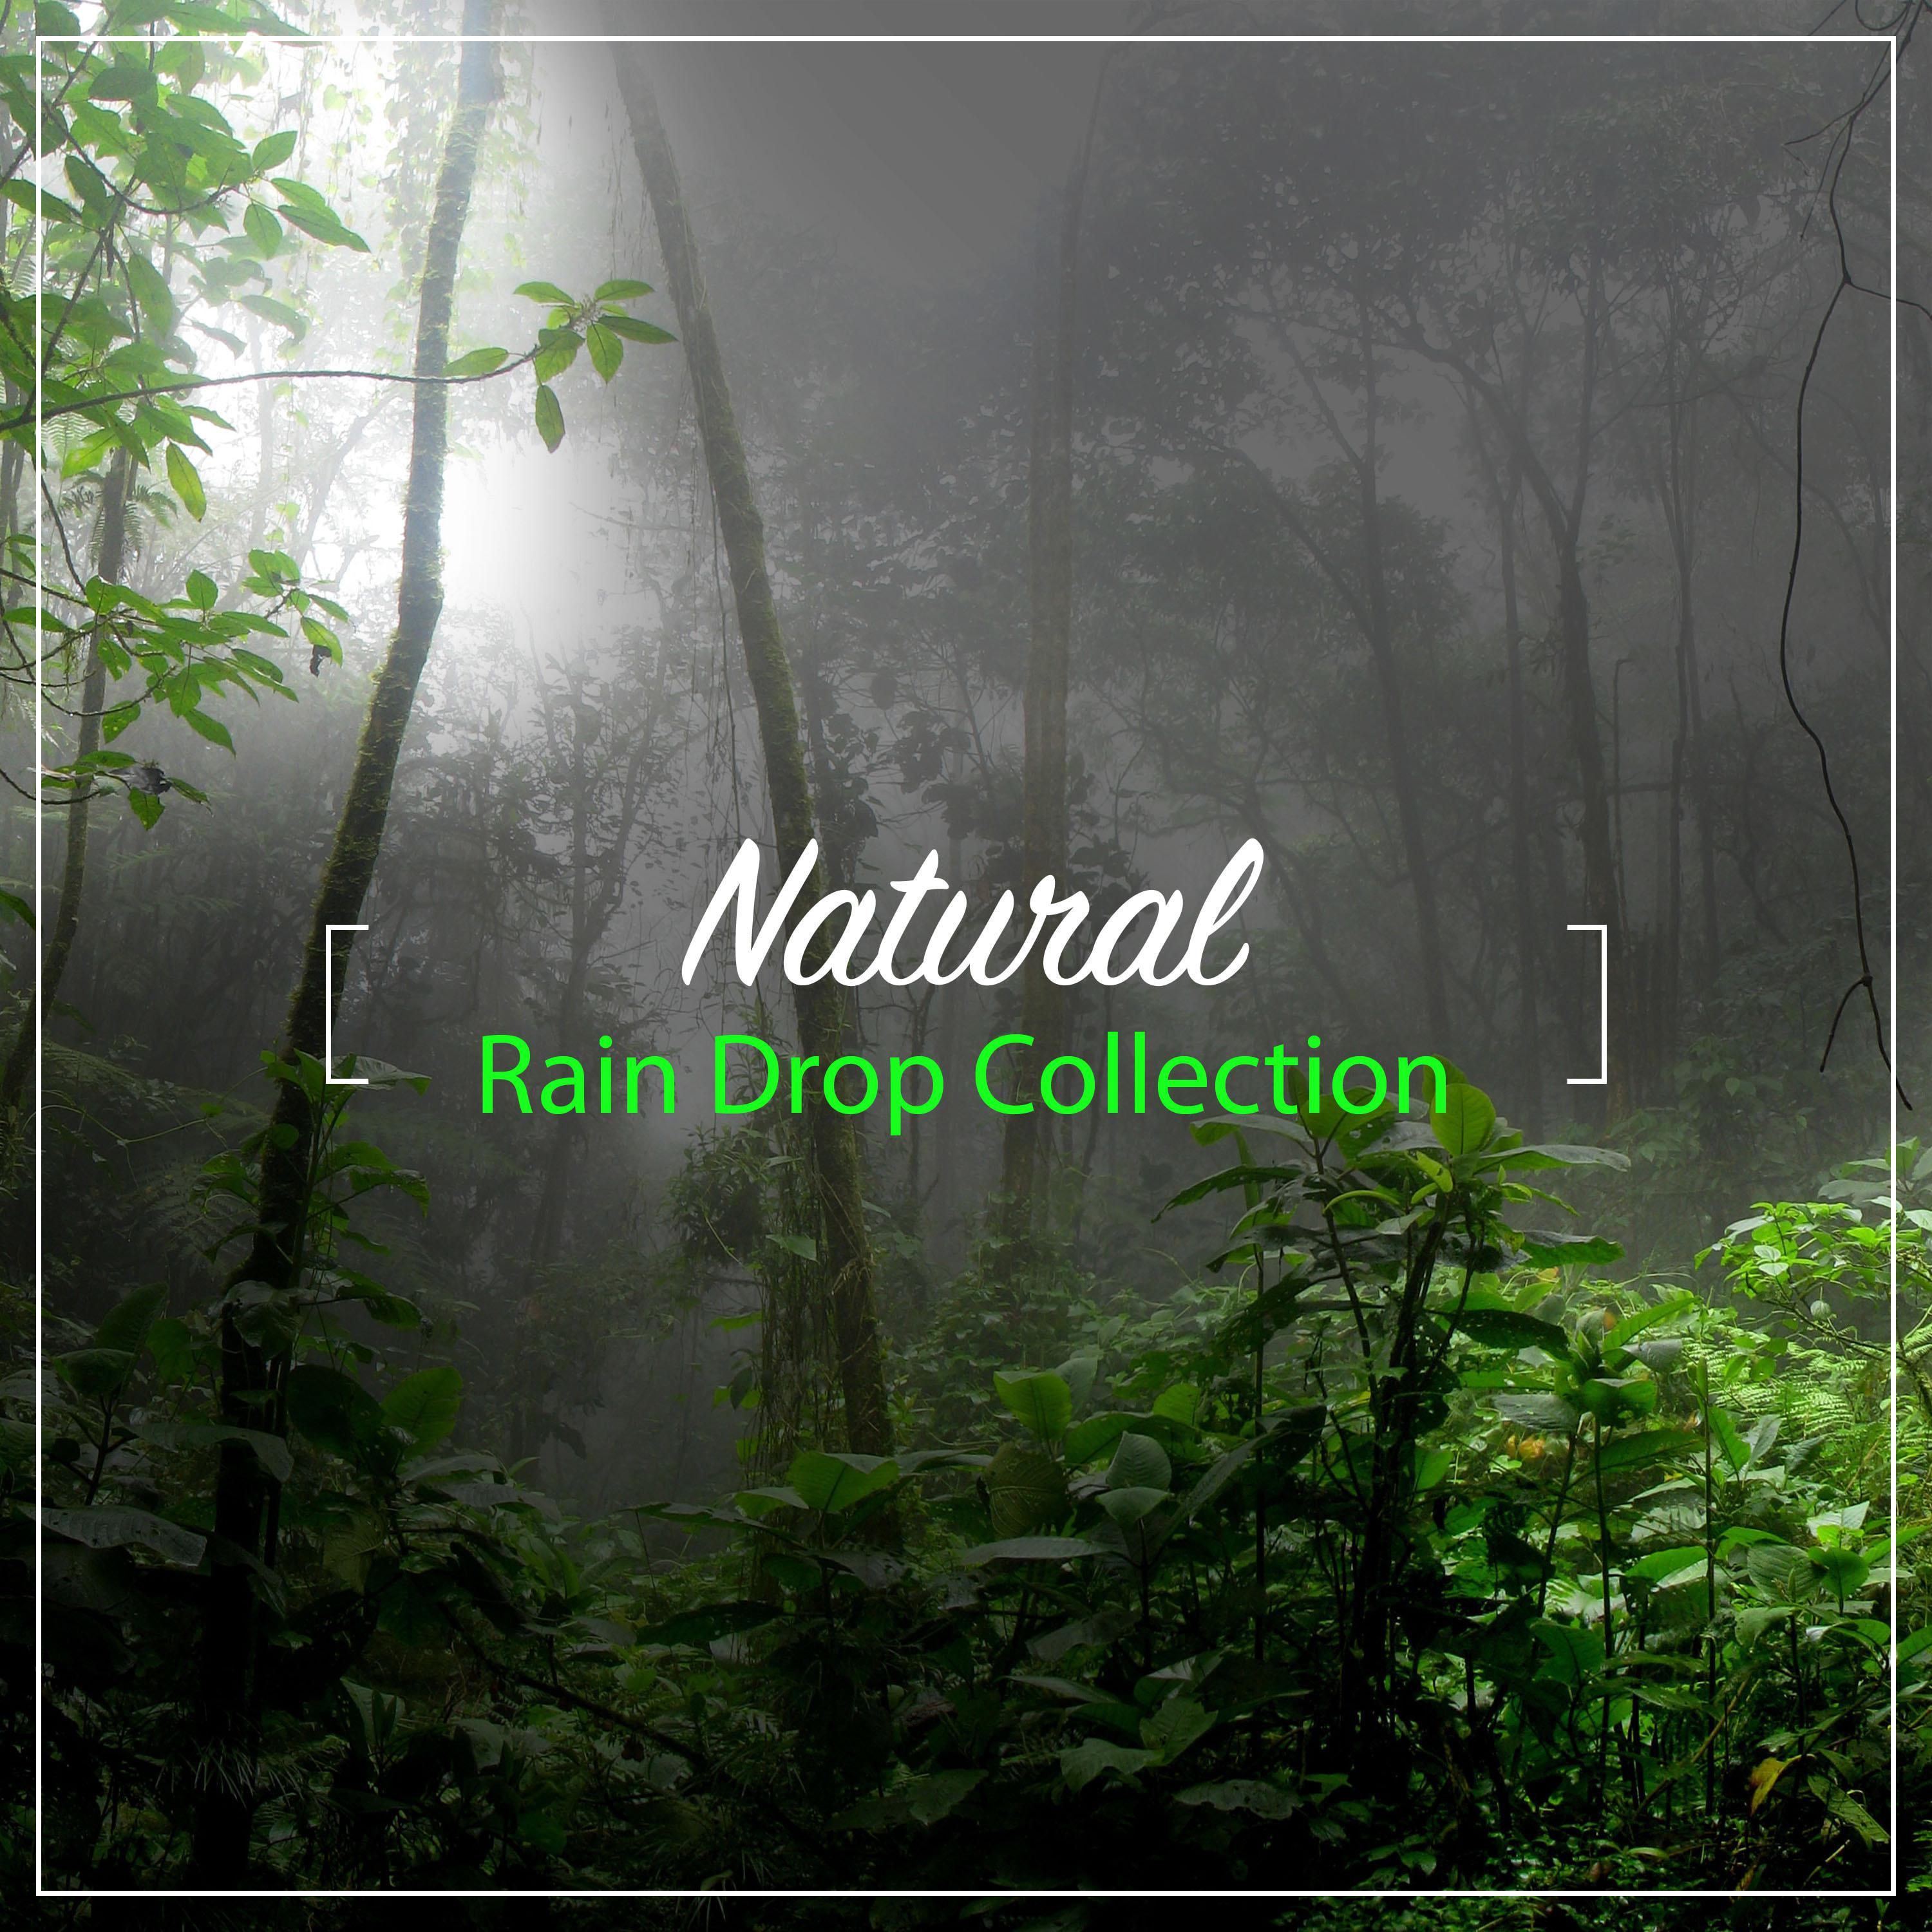 #24 Natural Rain Drop Collection from Nature